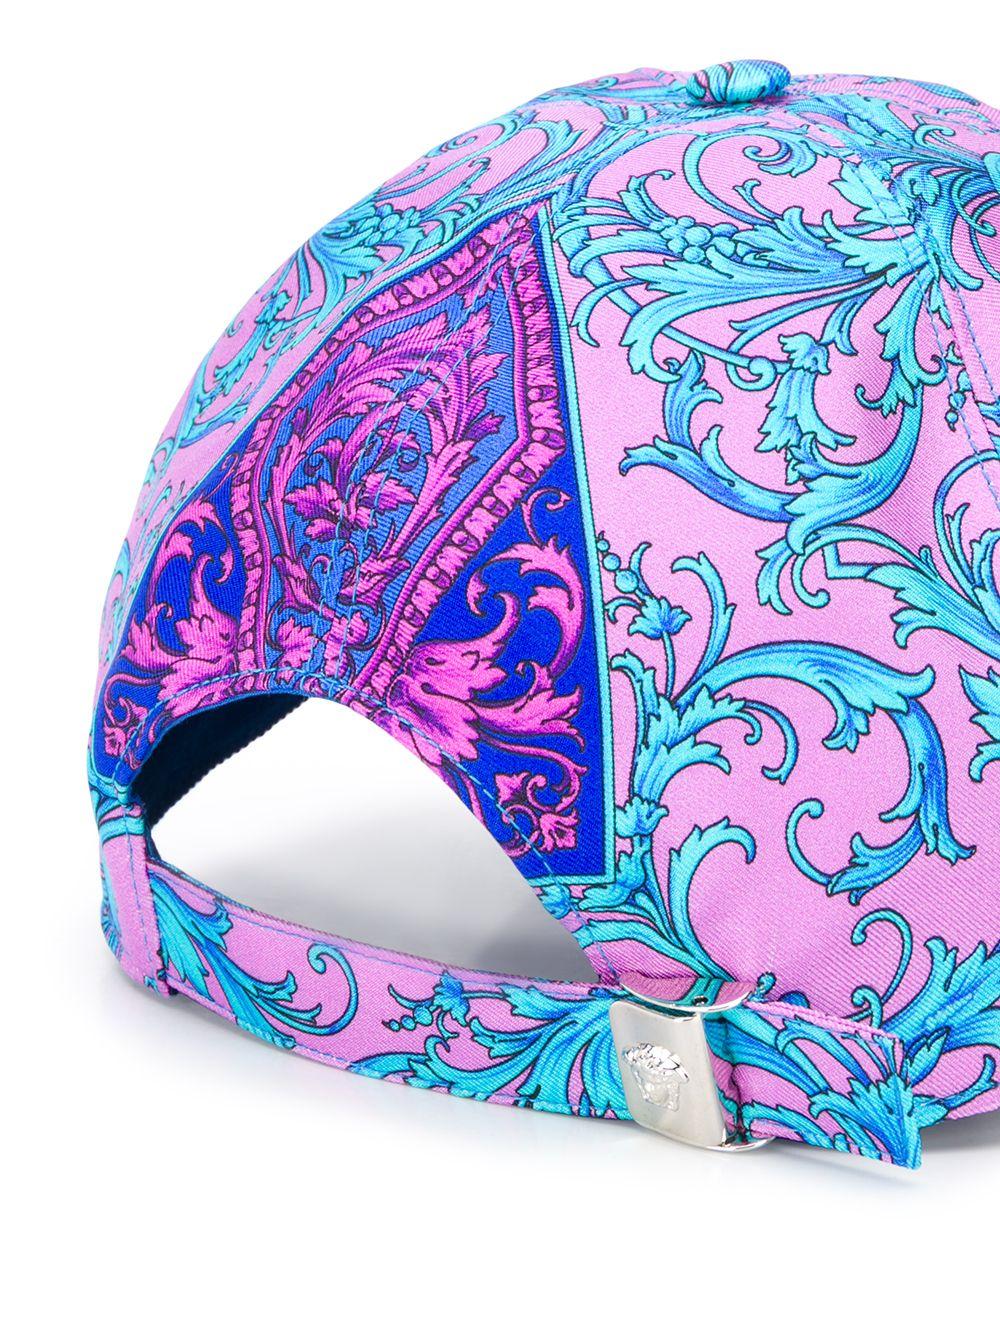 Hats off to Versace for creating with ultra-colourful baseball cap. Crafted from fuchsia and blue cotton to resemble the brand's signature Baroque print, it brings multiple dashes of colour to your most casual days. Featuring a curved peak, an